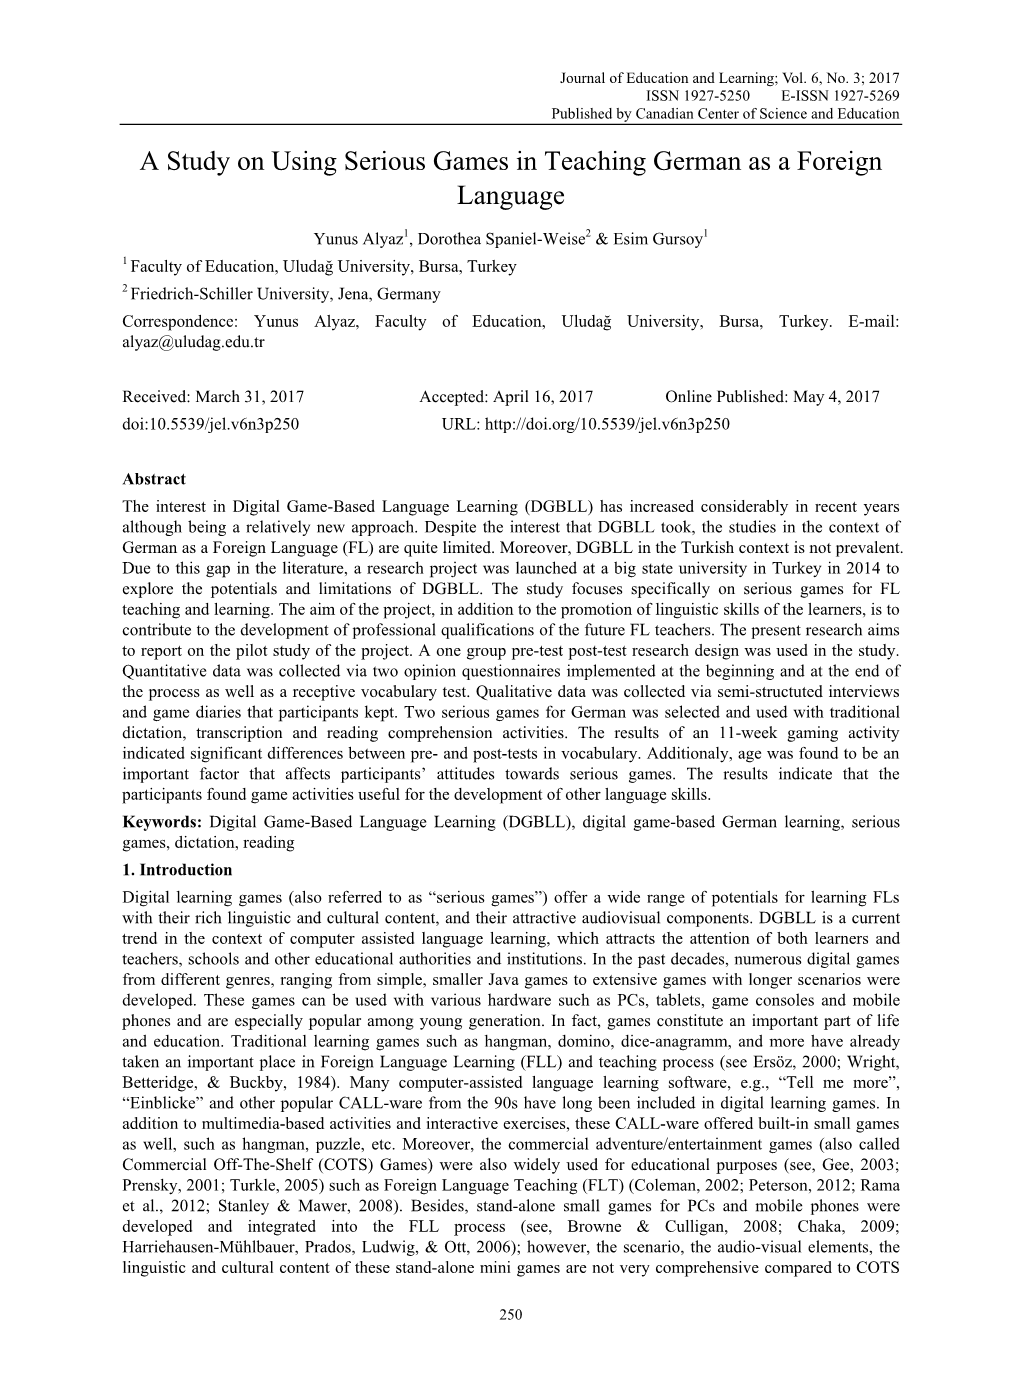 A Study on Using Serious Games in Teaching German As a Foreign Language